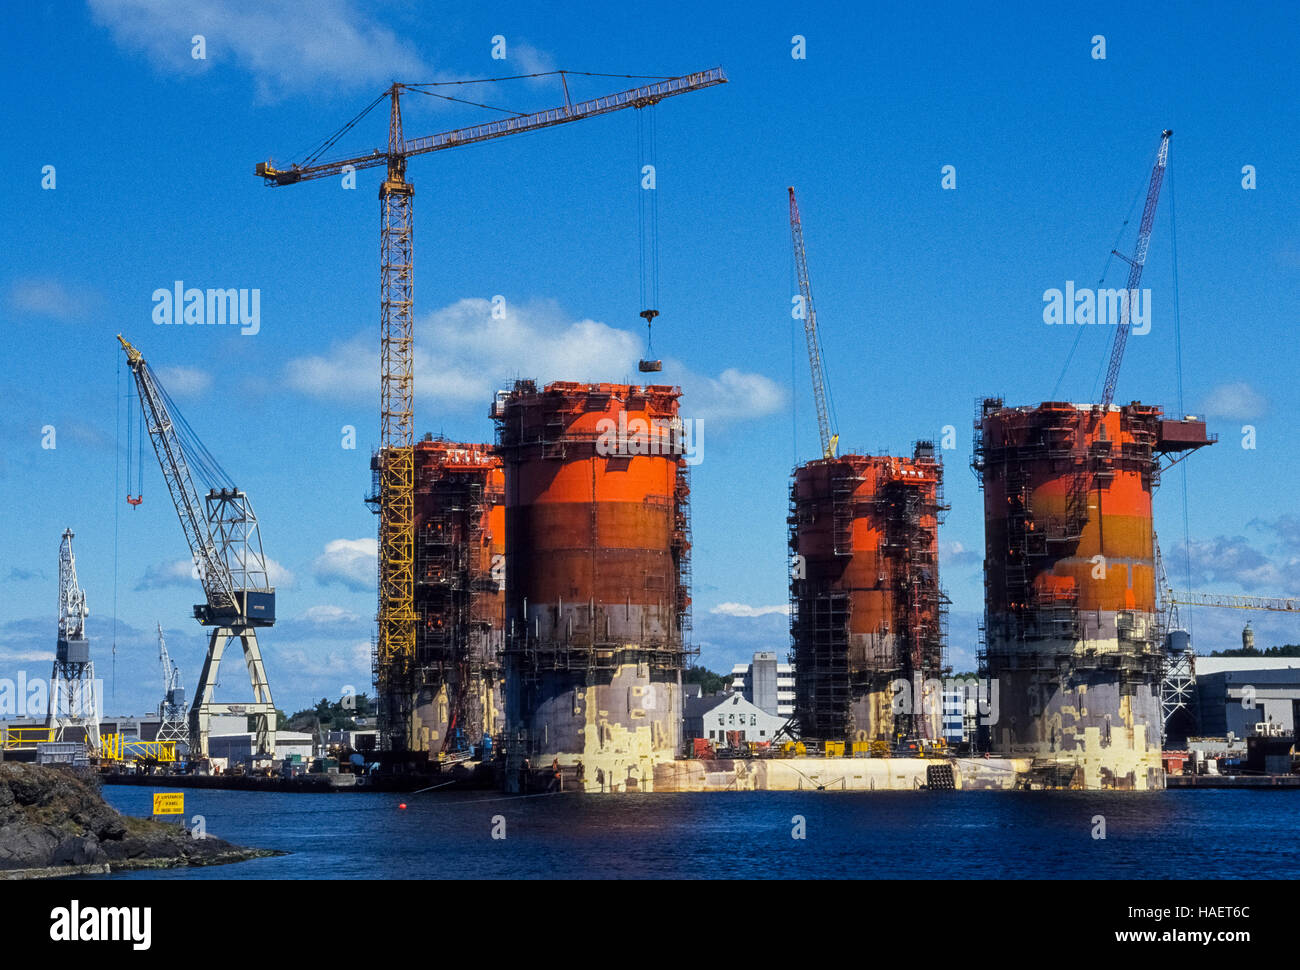 A huge multimillion-dollar platform used for offshore drilling for oil and gas in the North Sea is seen under construction in the 1990s at Stravanger, Norway, which is known as the 'Oil Capital' of that Scandinavian country. In the mid-1980s there were nearly 100 oil rigs operating in the North Sea but the number has dwindled since the turn of the century due to slumps in the prices for petroleum. Stock Photo